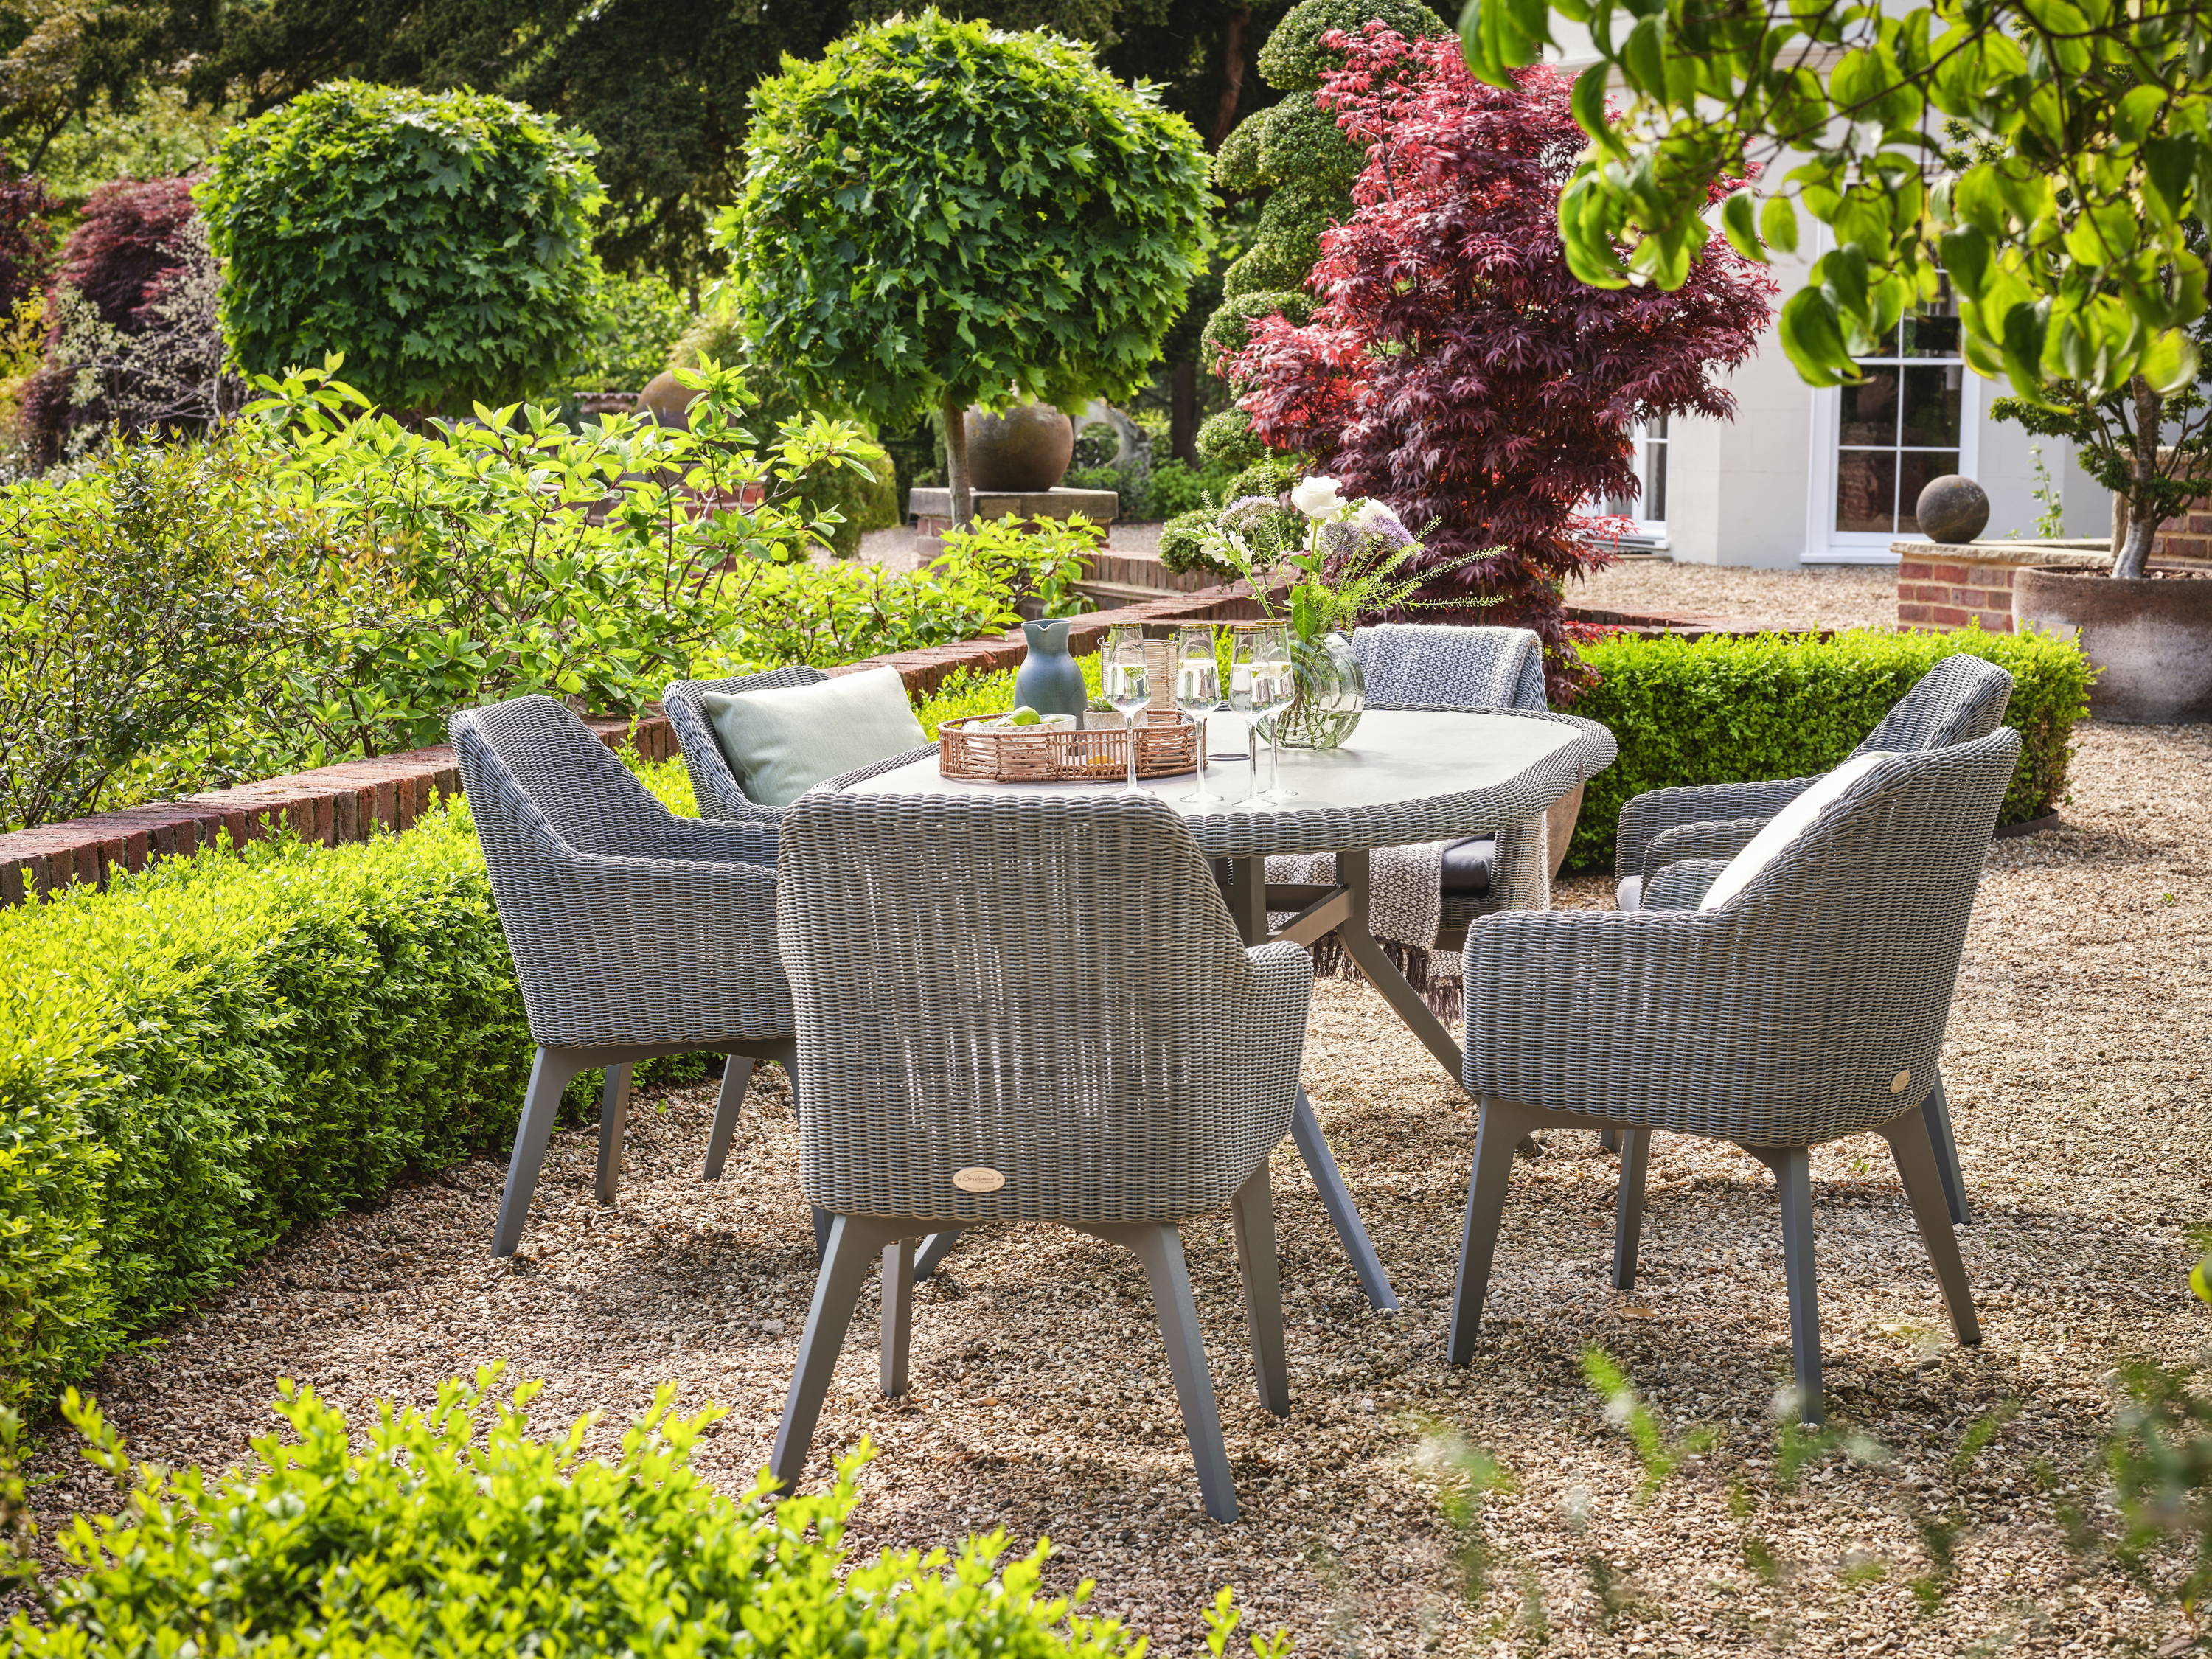 Grey garden rattan dining set with 6 dining armchairs and an oval table surrounded by hedges and trees.